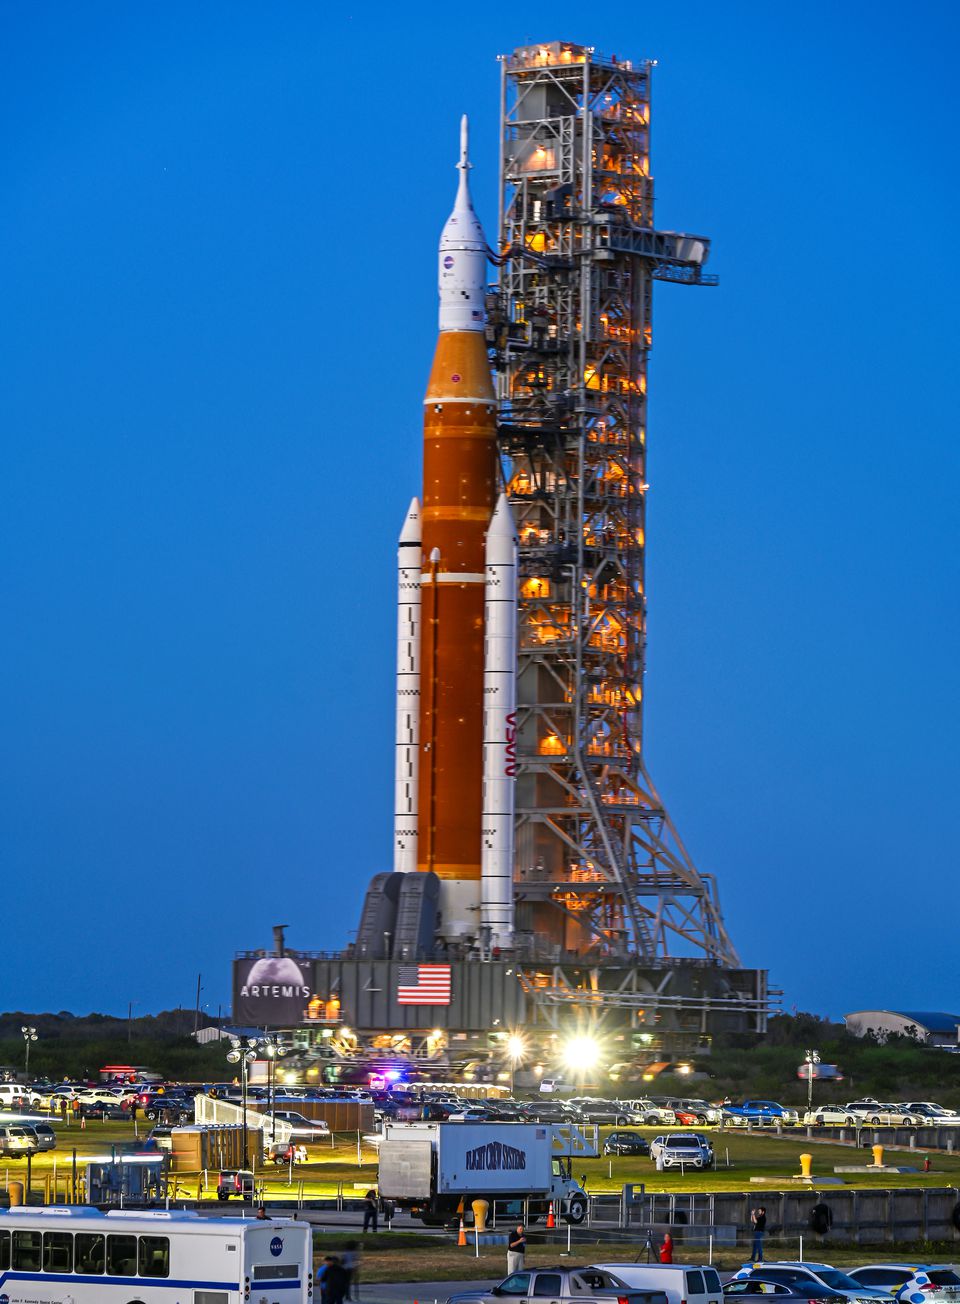 NASA's next-generation moon rocket, the Space Launch System (SLS) rocket with its Orion crew capsule perched on top, rolls down the crawler path from the Vehicle Assembly Building (VAB) on a slow-motion journey to its launch pad at Cape Canaveral, Florida, U.S. March 17, 2022. Photo: Reuters